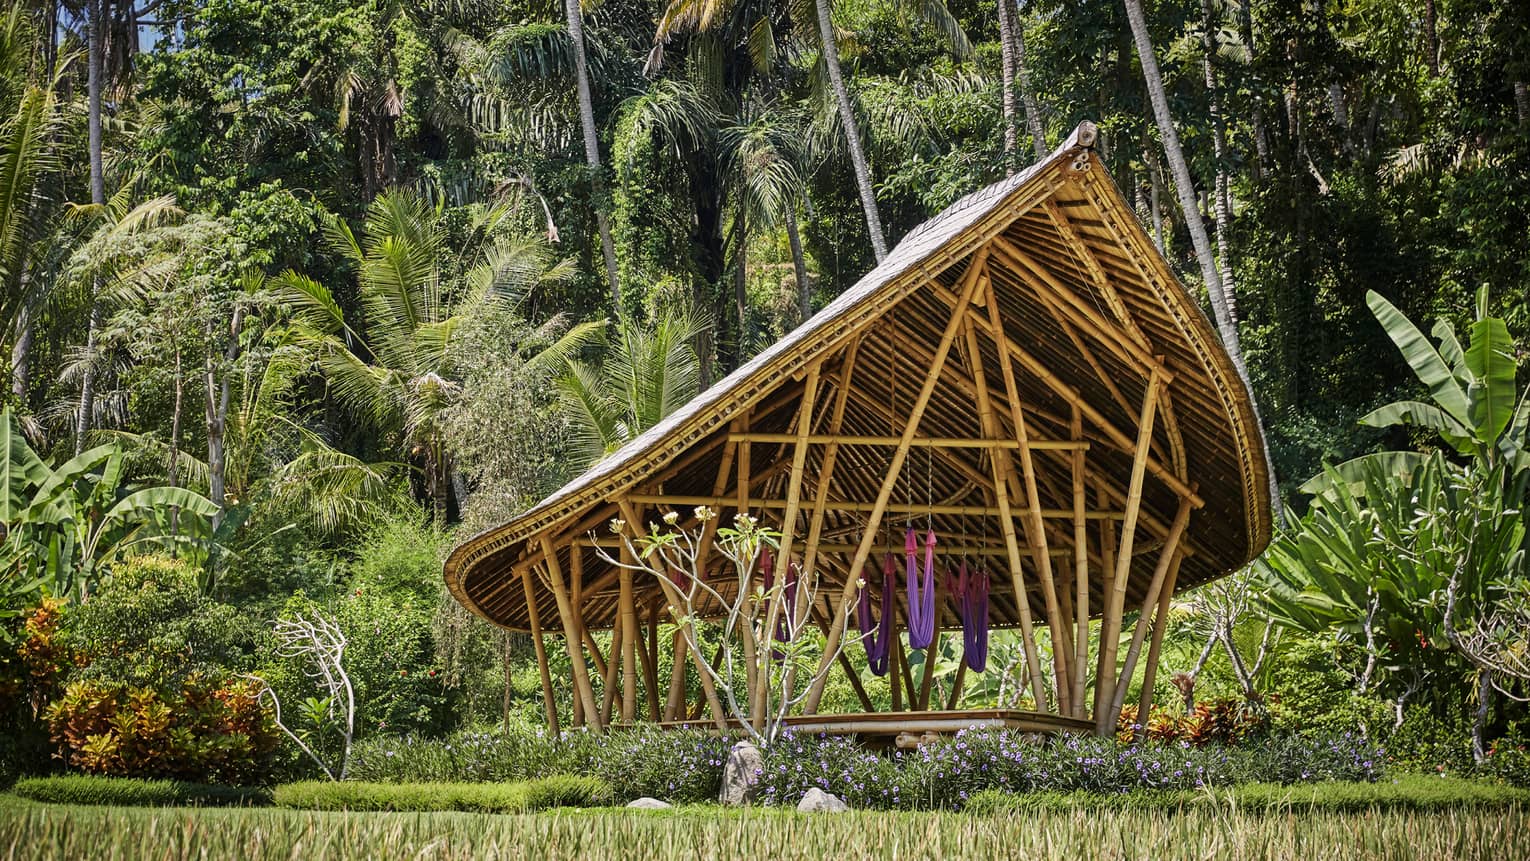 Dharma Shanti Bale meditation pavilion with modern-looking wood structure, colourful hammocks in tropical forest